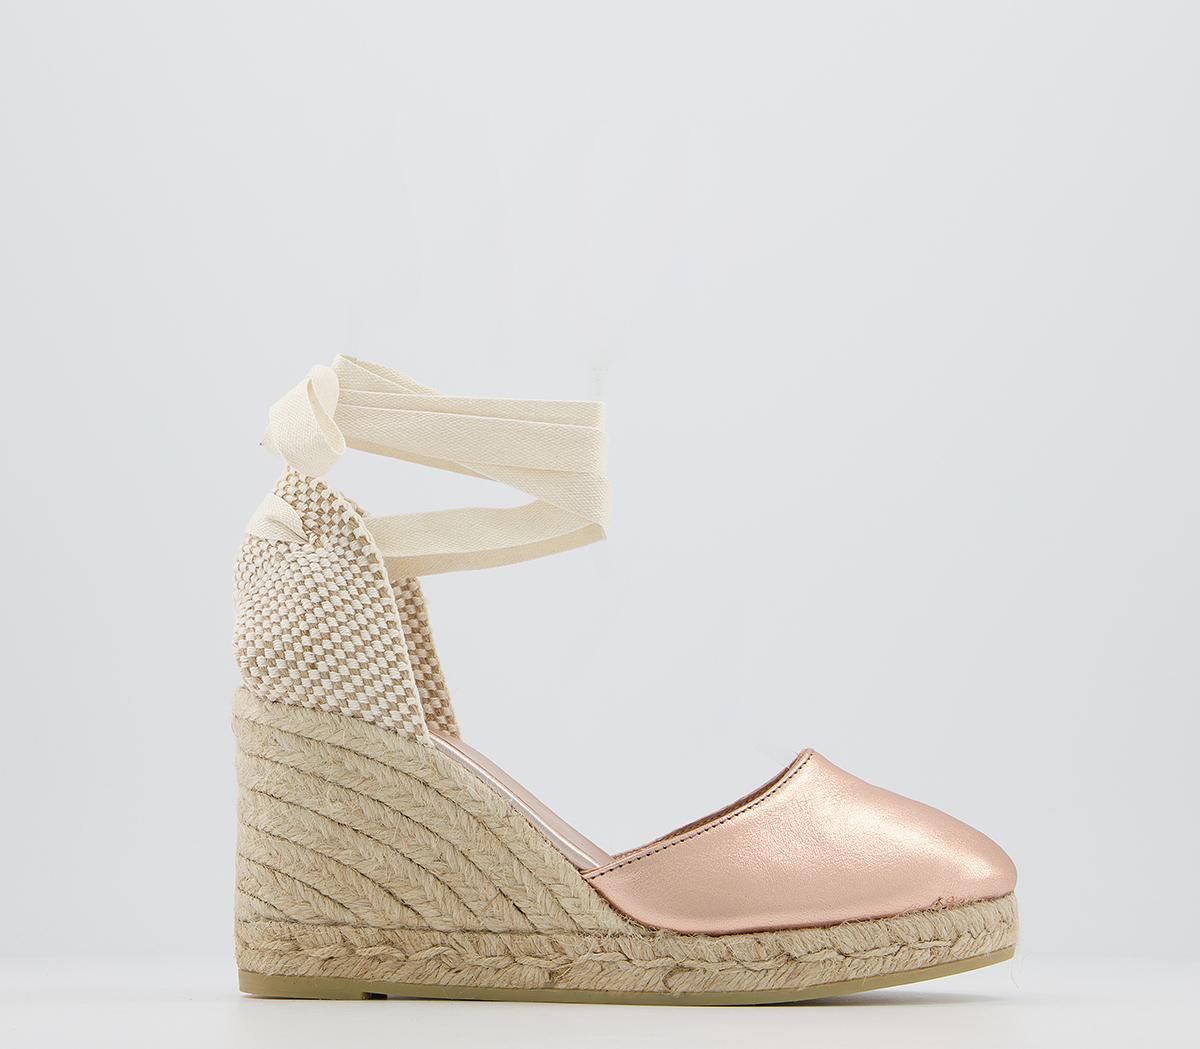 Gaimo for OFFICEAnkle Wrap WedgesRose Gold